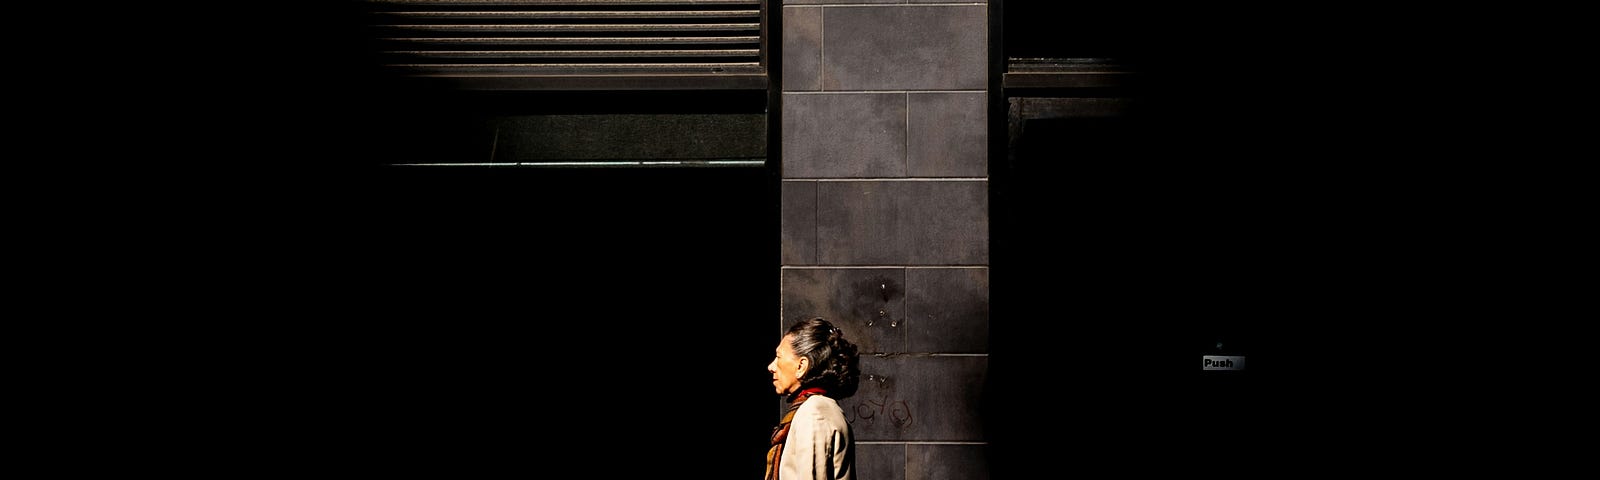 Individual people, captured as they walk into a shaft of light on Broadway in New York.